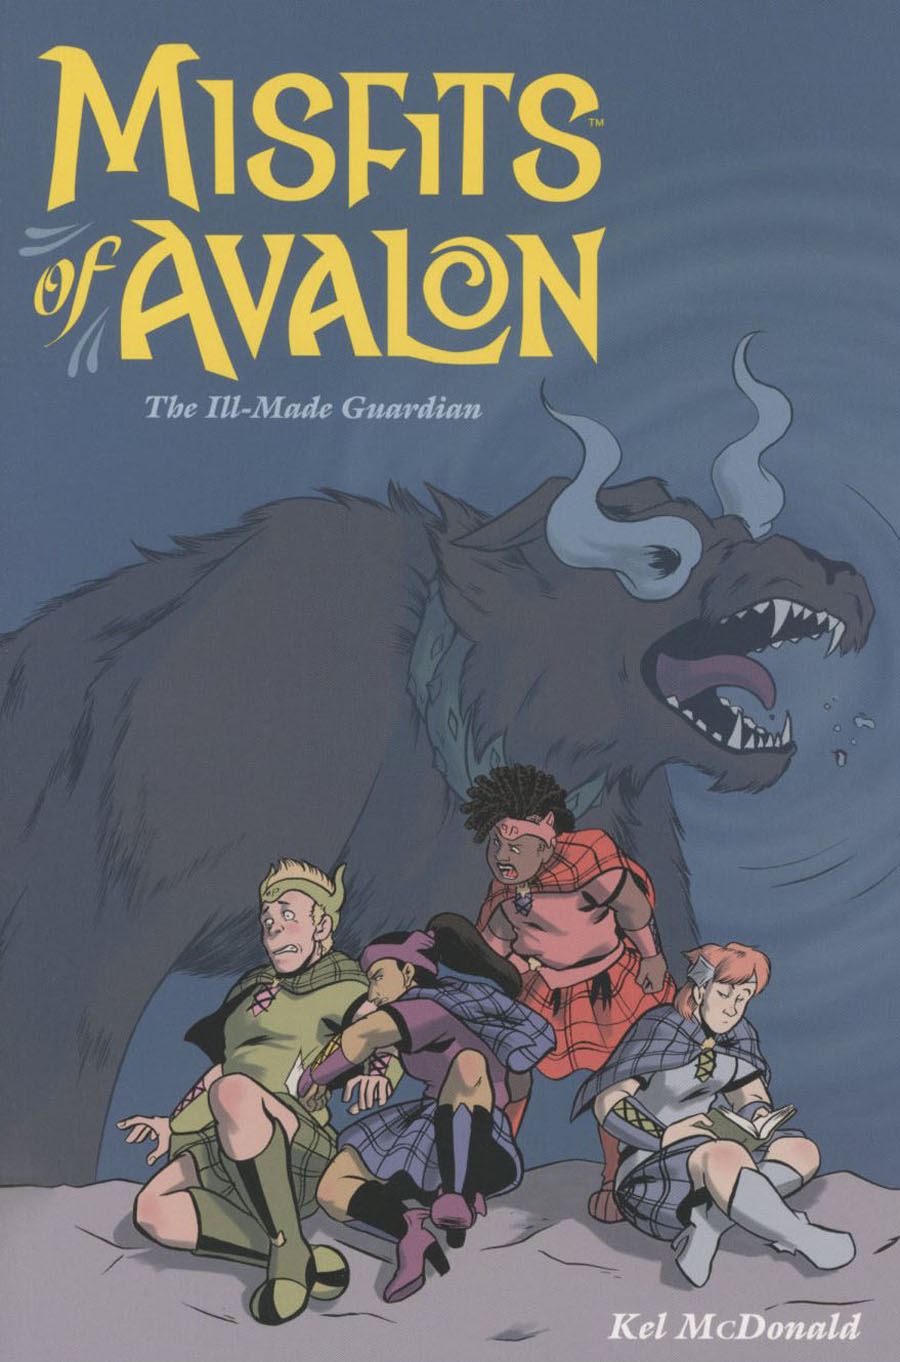 Misfits Of Avalon Vol 2 The Ill-Made Guardian TP